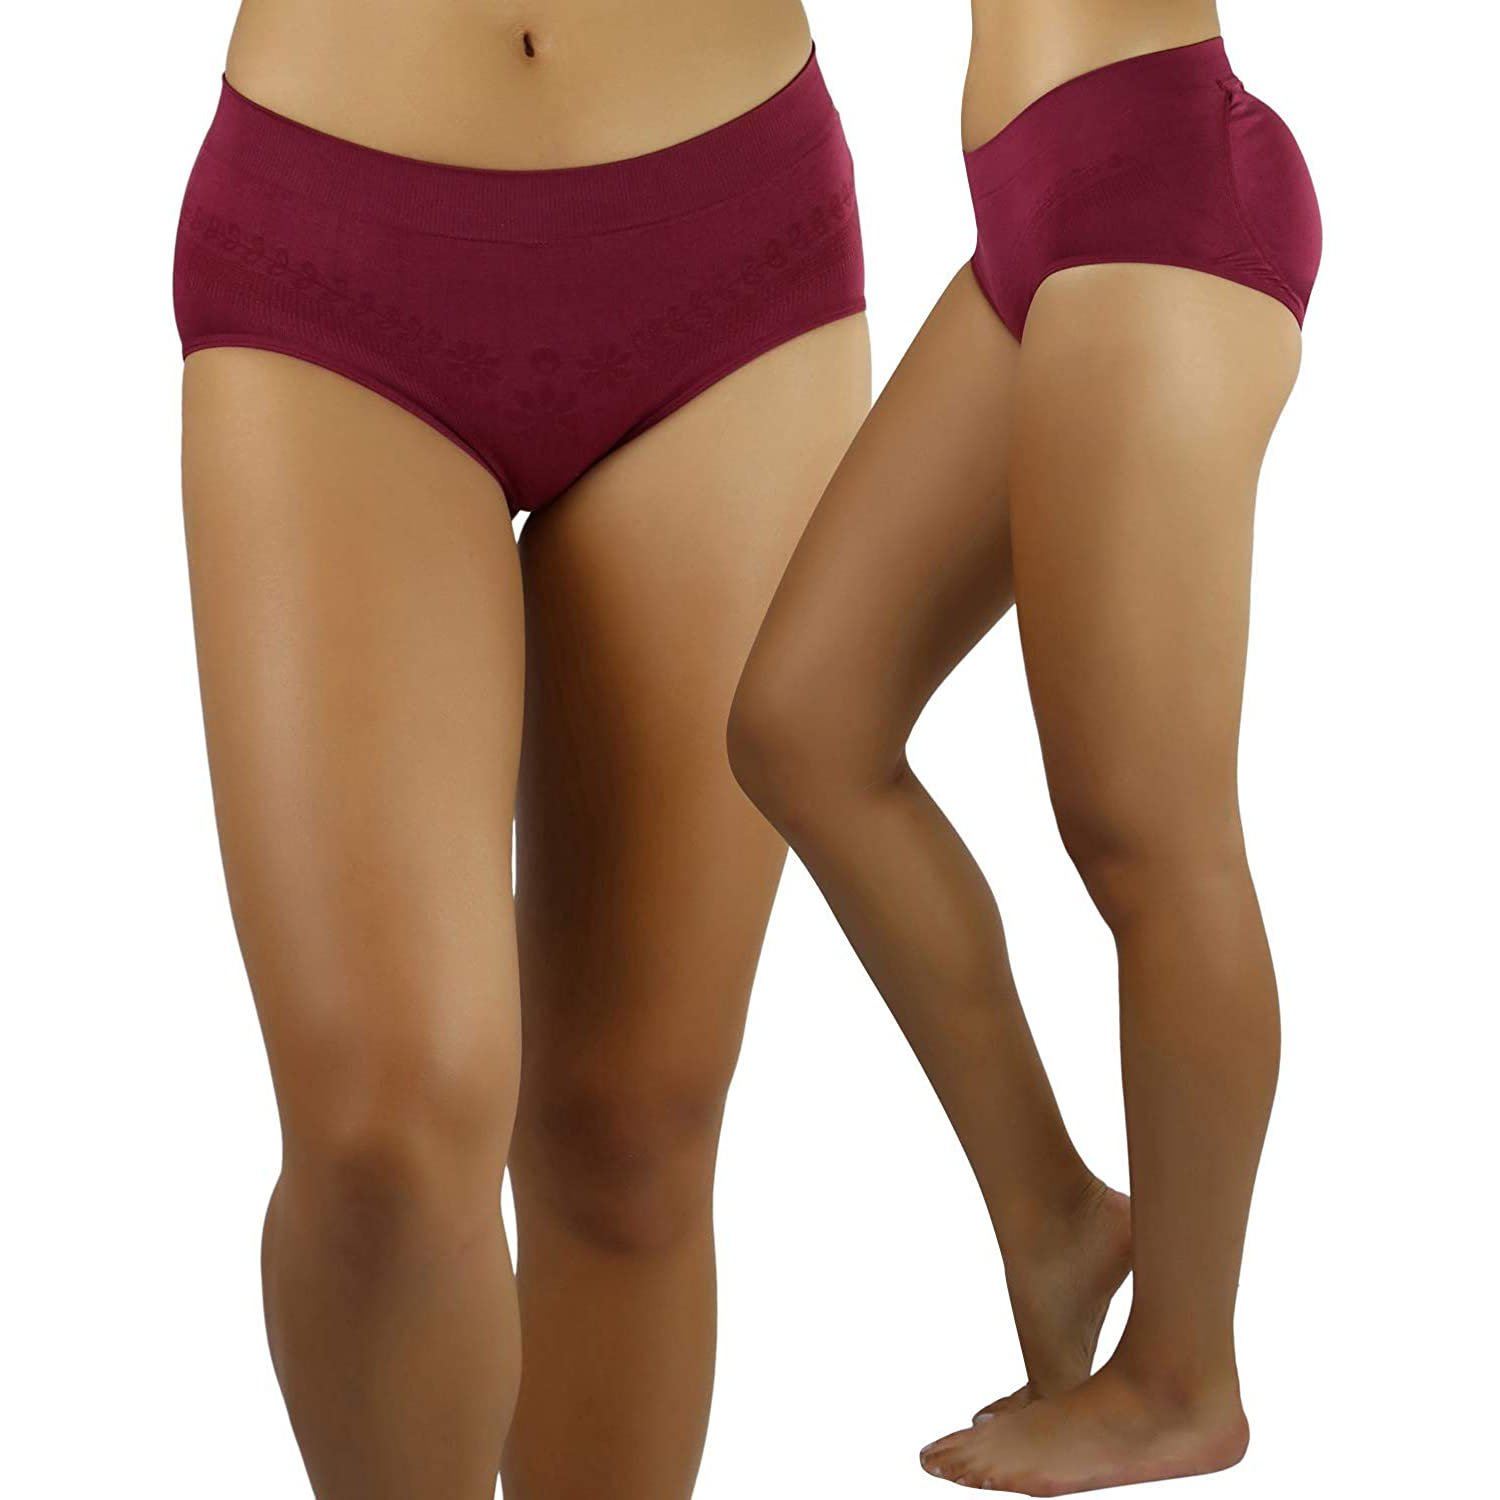 6-Pack: Women's Slimming High-Waisted Panty Briefs - Plus Size